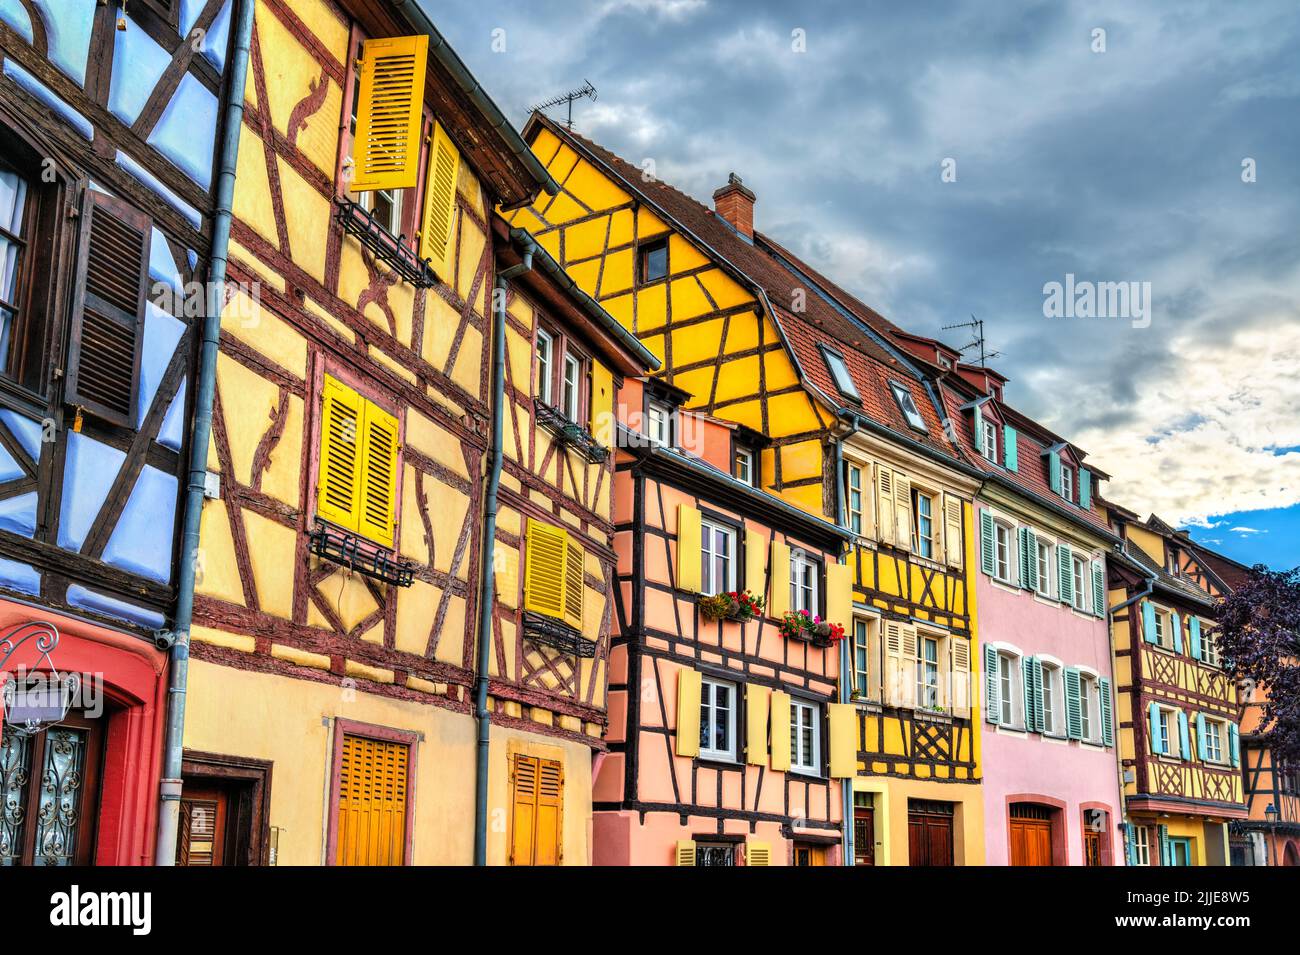 Traditional half-timbered houses in Colmar, France Stock Photo